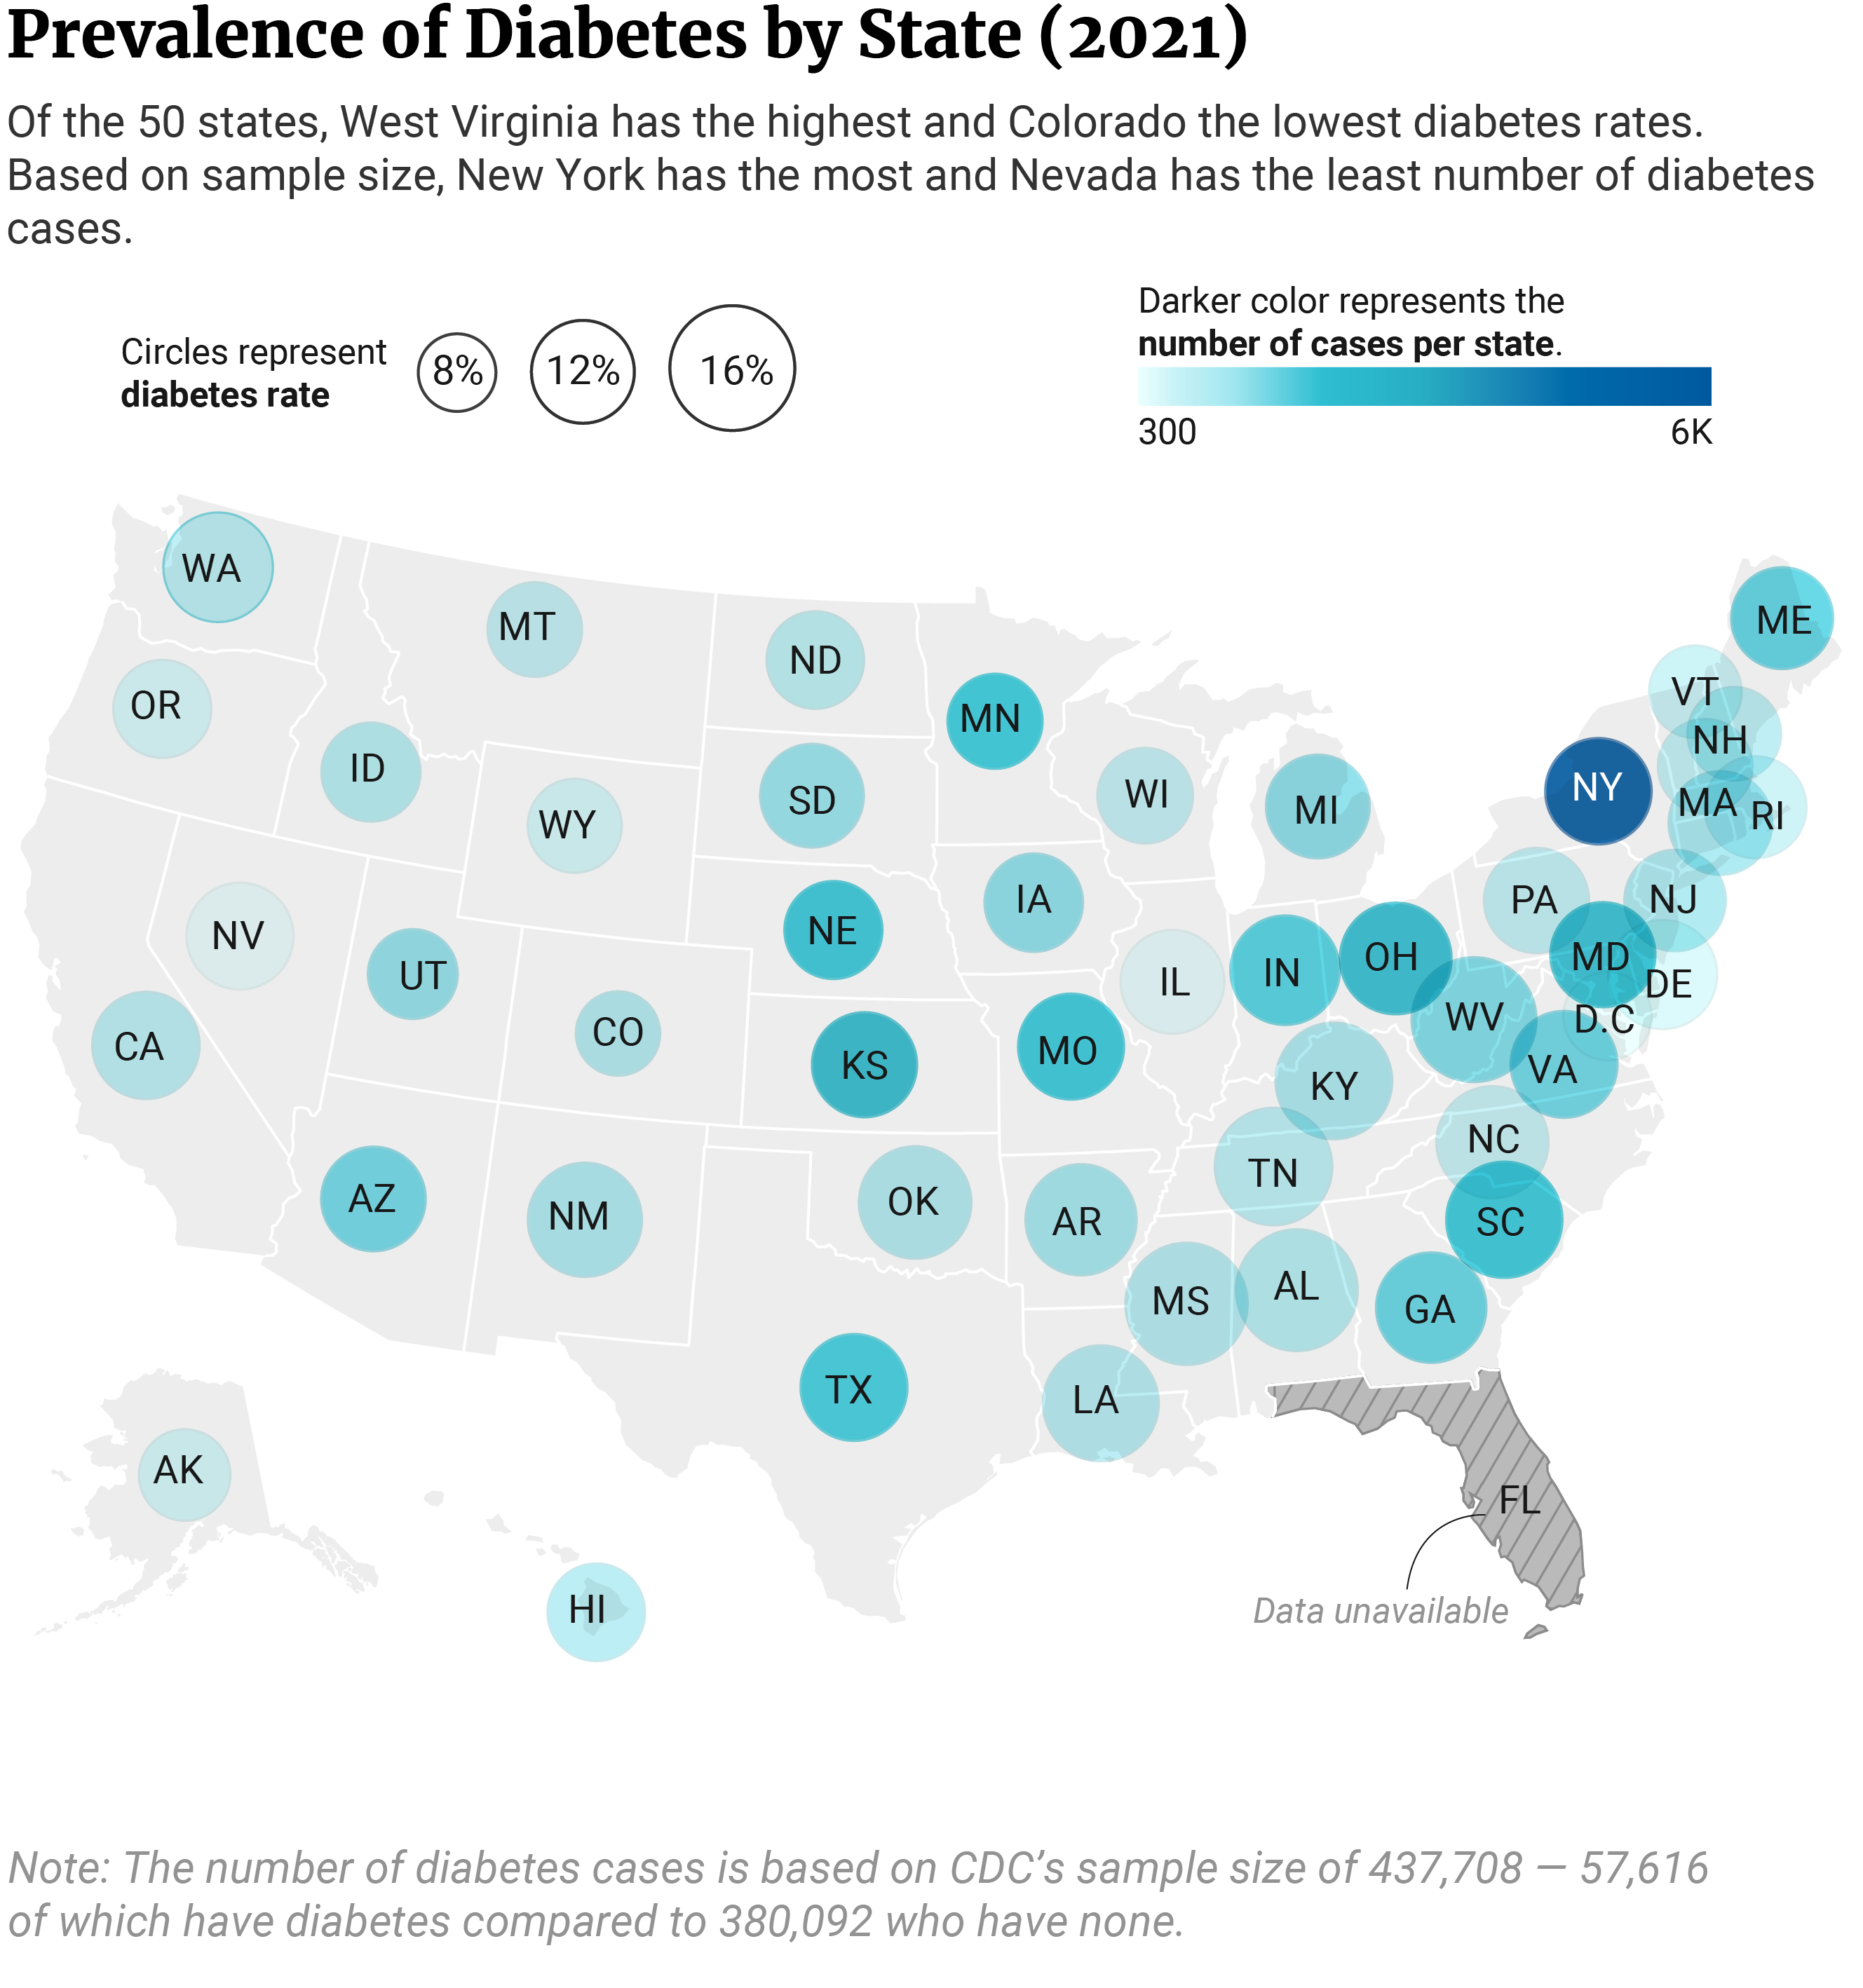 USA Map showing diabetes rates and the number of diabetes cases (based on sample size) per state.